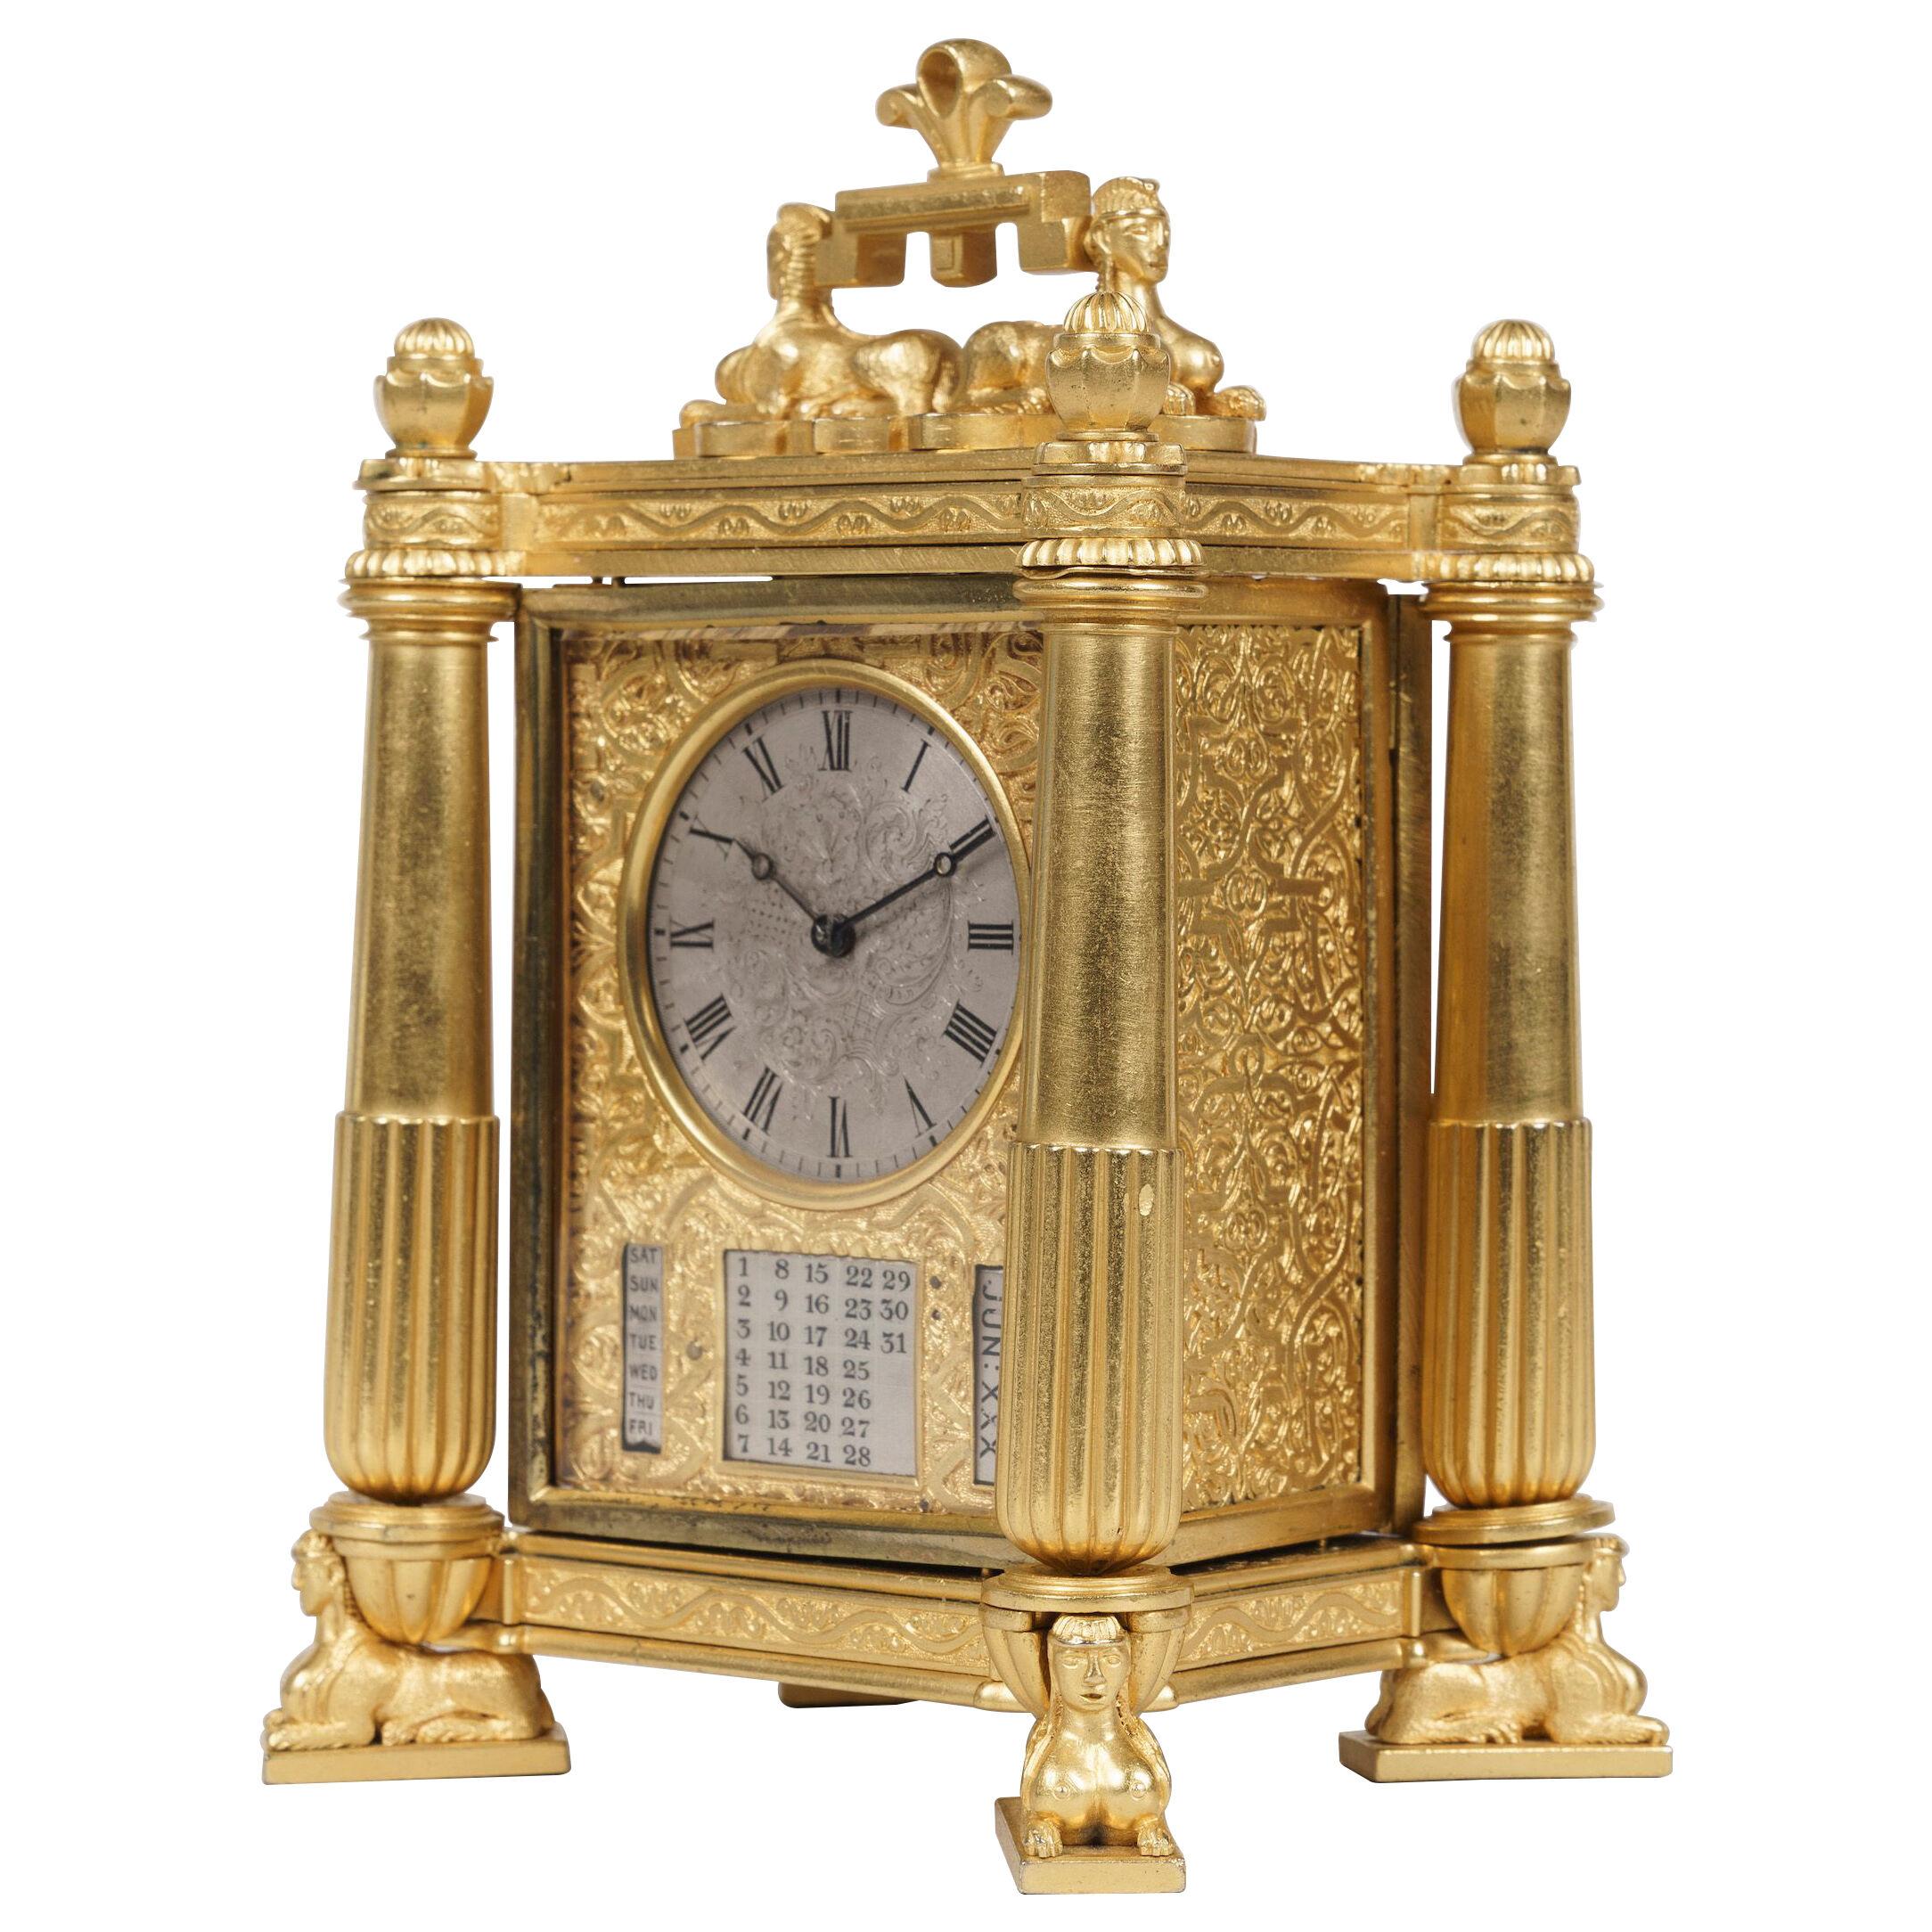 Antique 'Egyptian' Style Carriage Clock